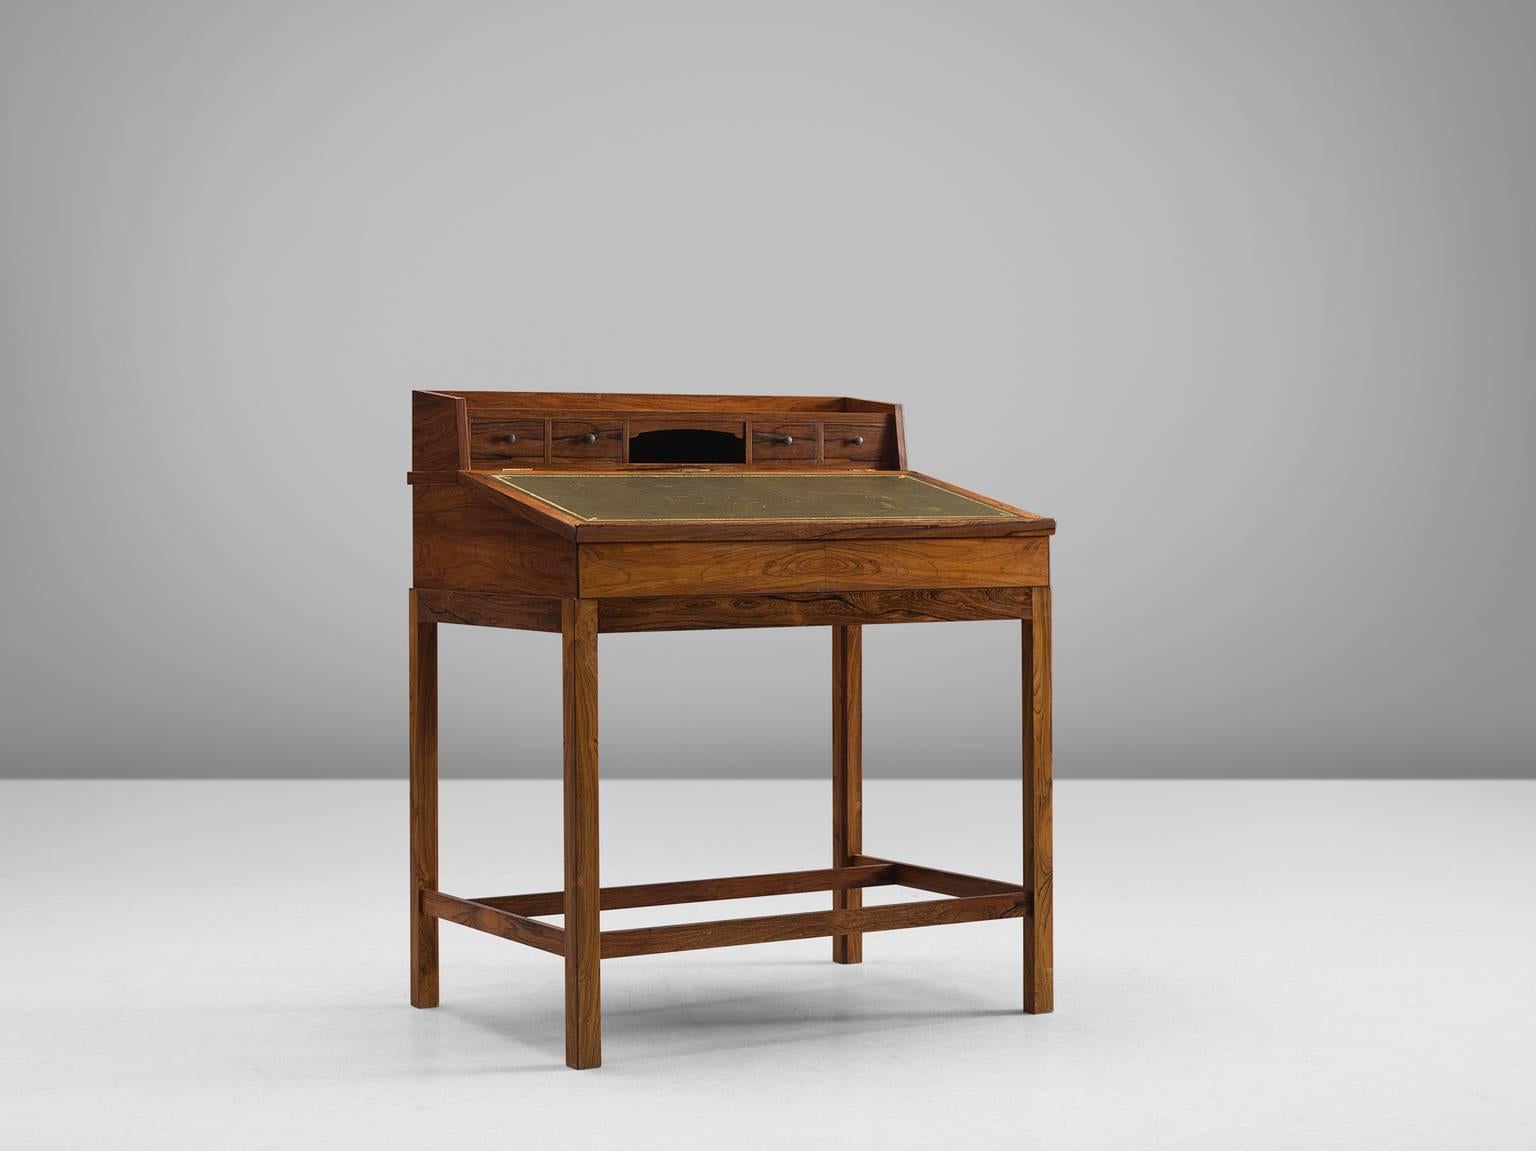 Secretaire, rosewood with olive green leather inlay, Denmark, 1940s

This desk can be used as a luxurious writing desk. The design remains elegant due to the refined shape and combination of materials. Nice brass pulls on the small drawers. Has